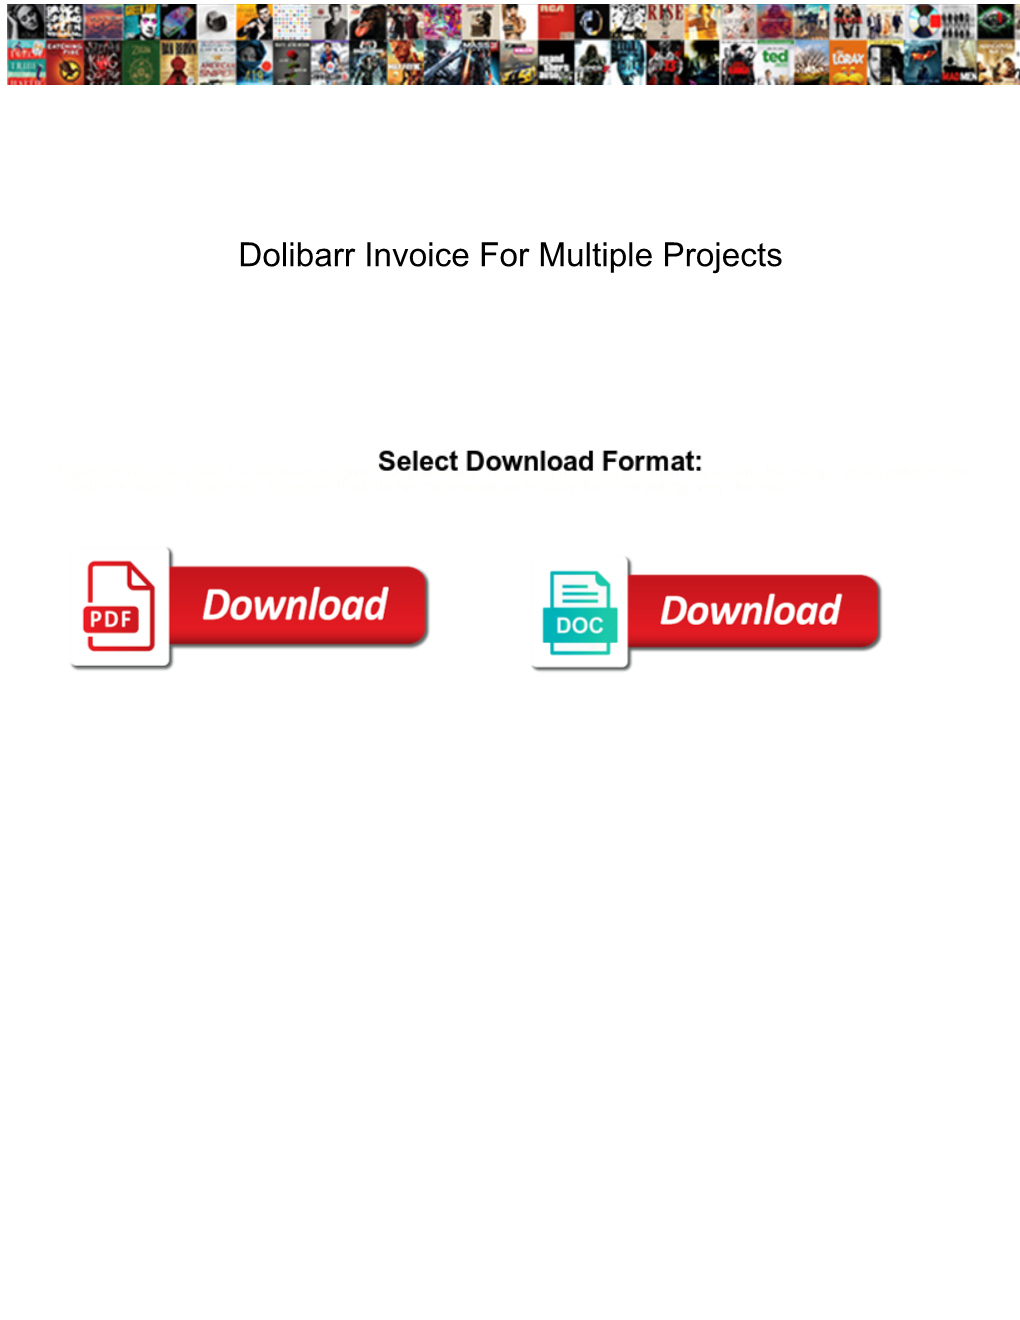 Dolibarr Invoice for Multiple Projects